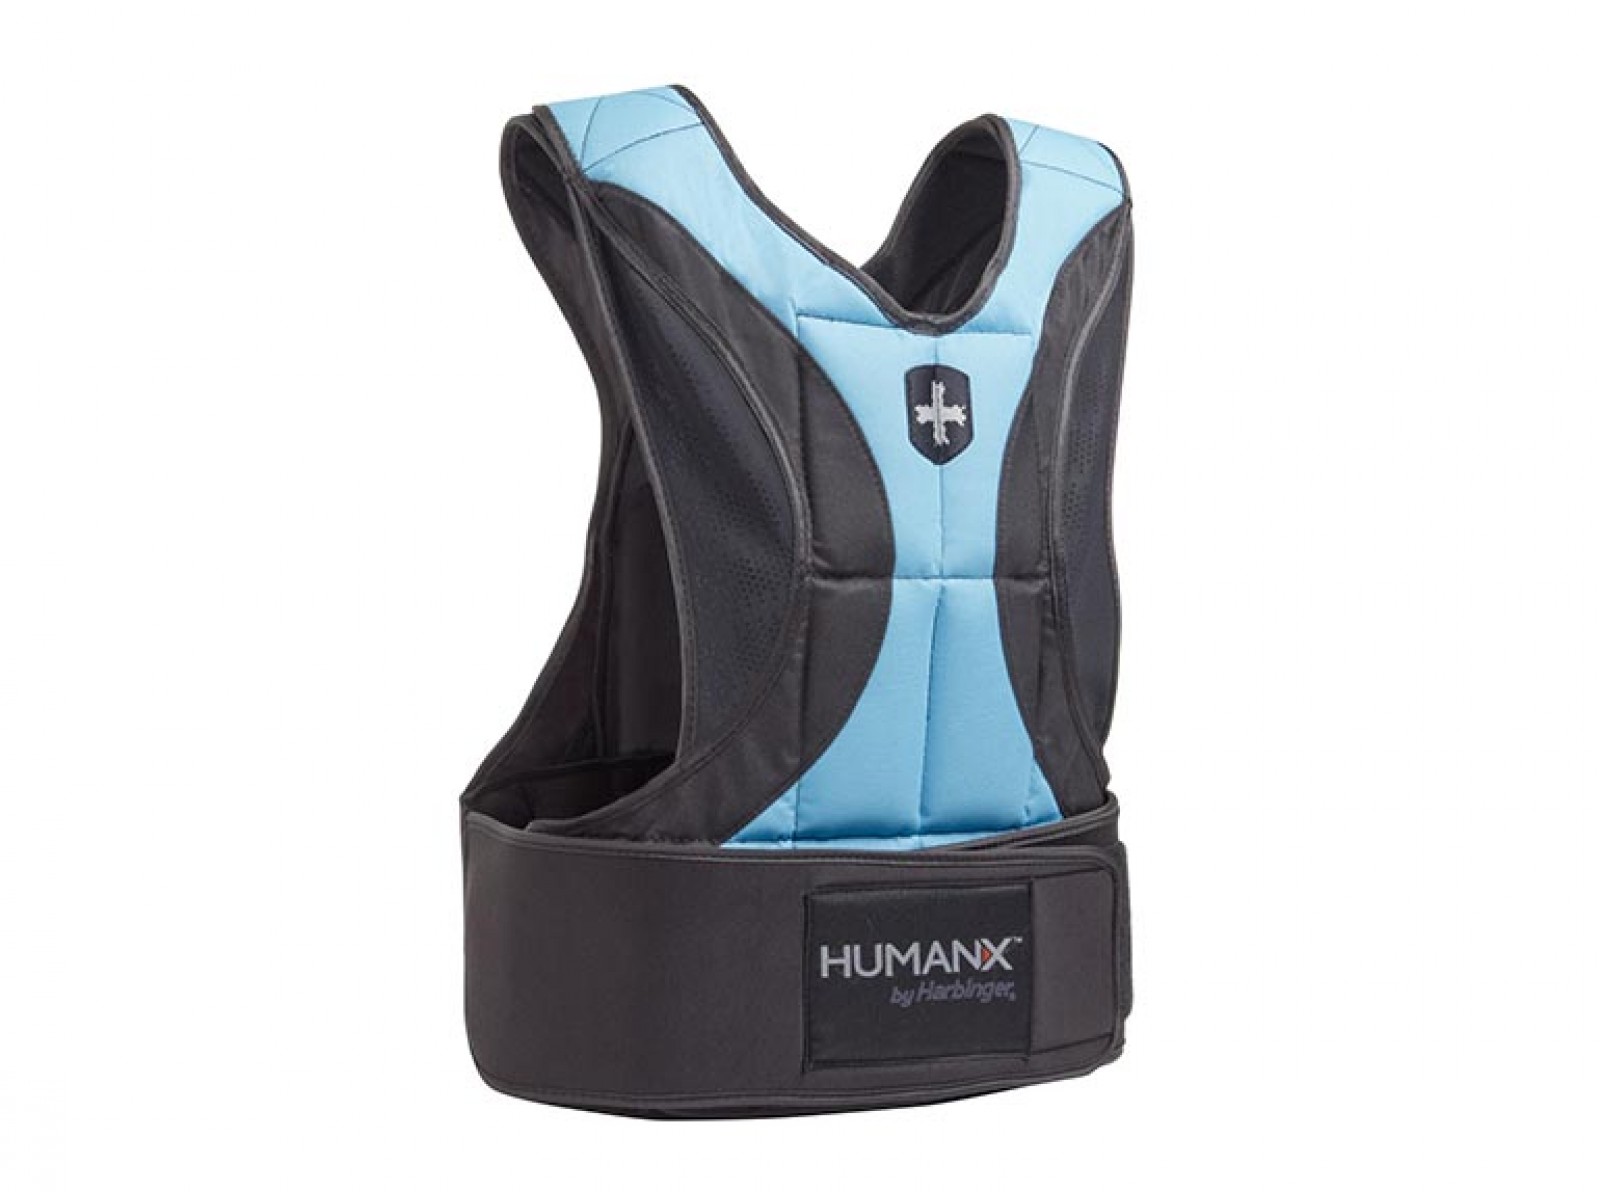 humanx 10lb womens weight vest by harbinger